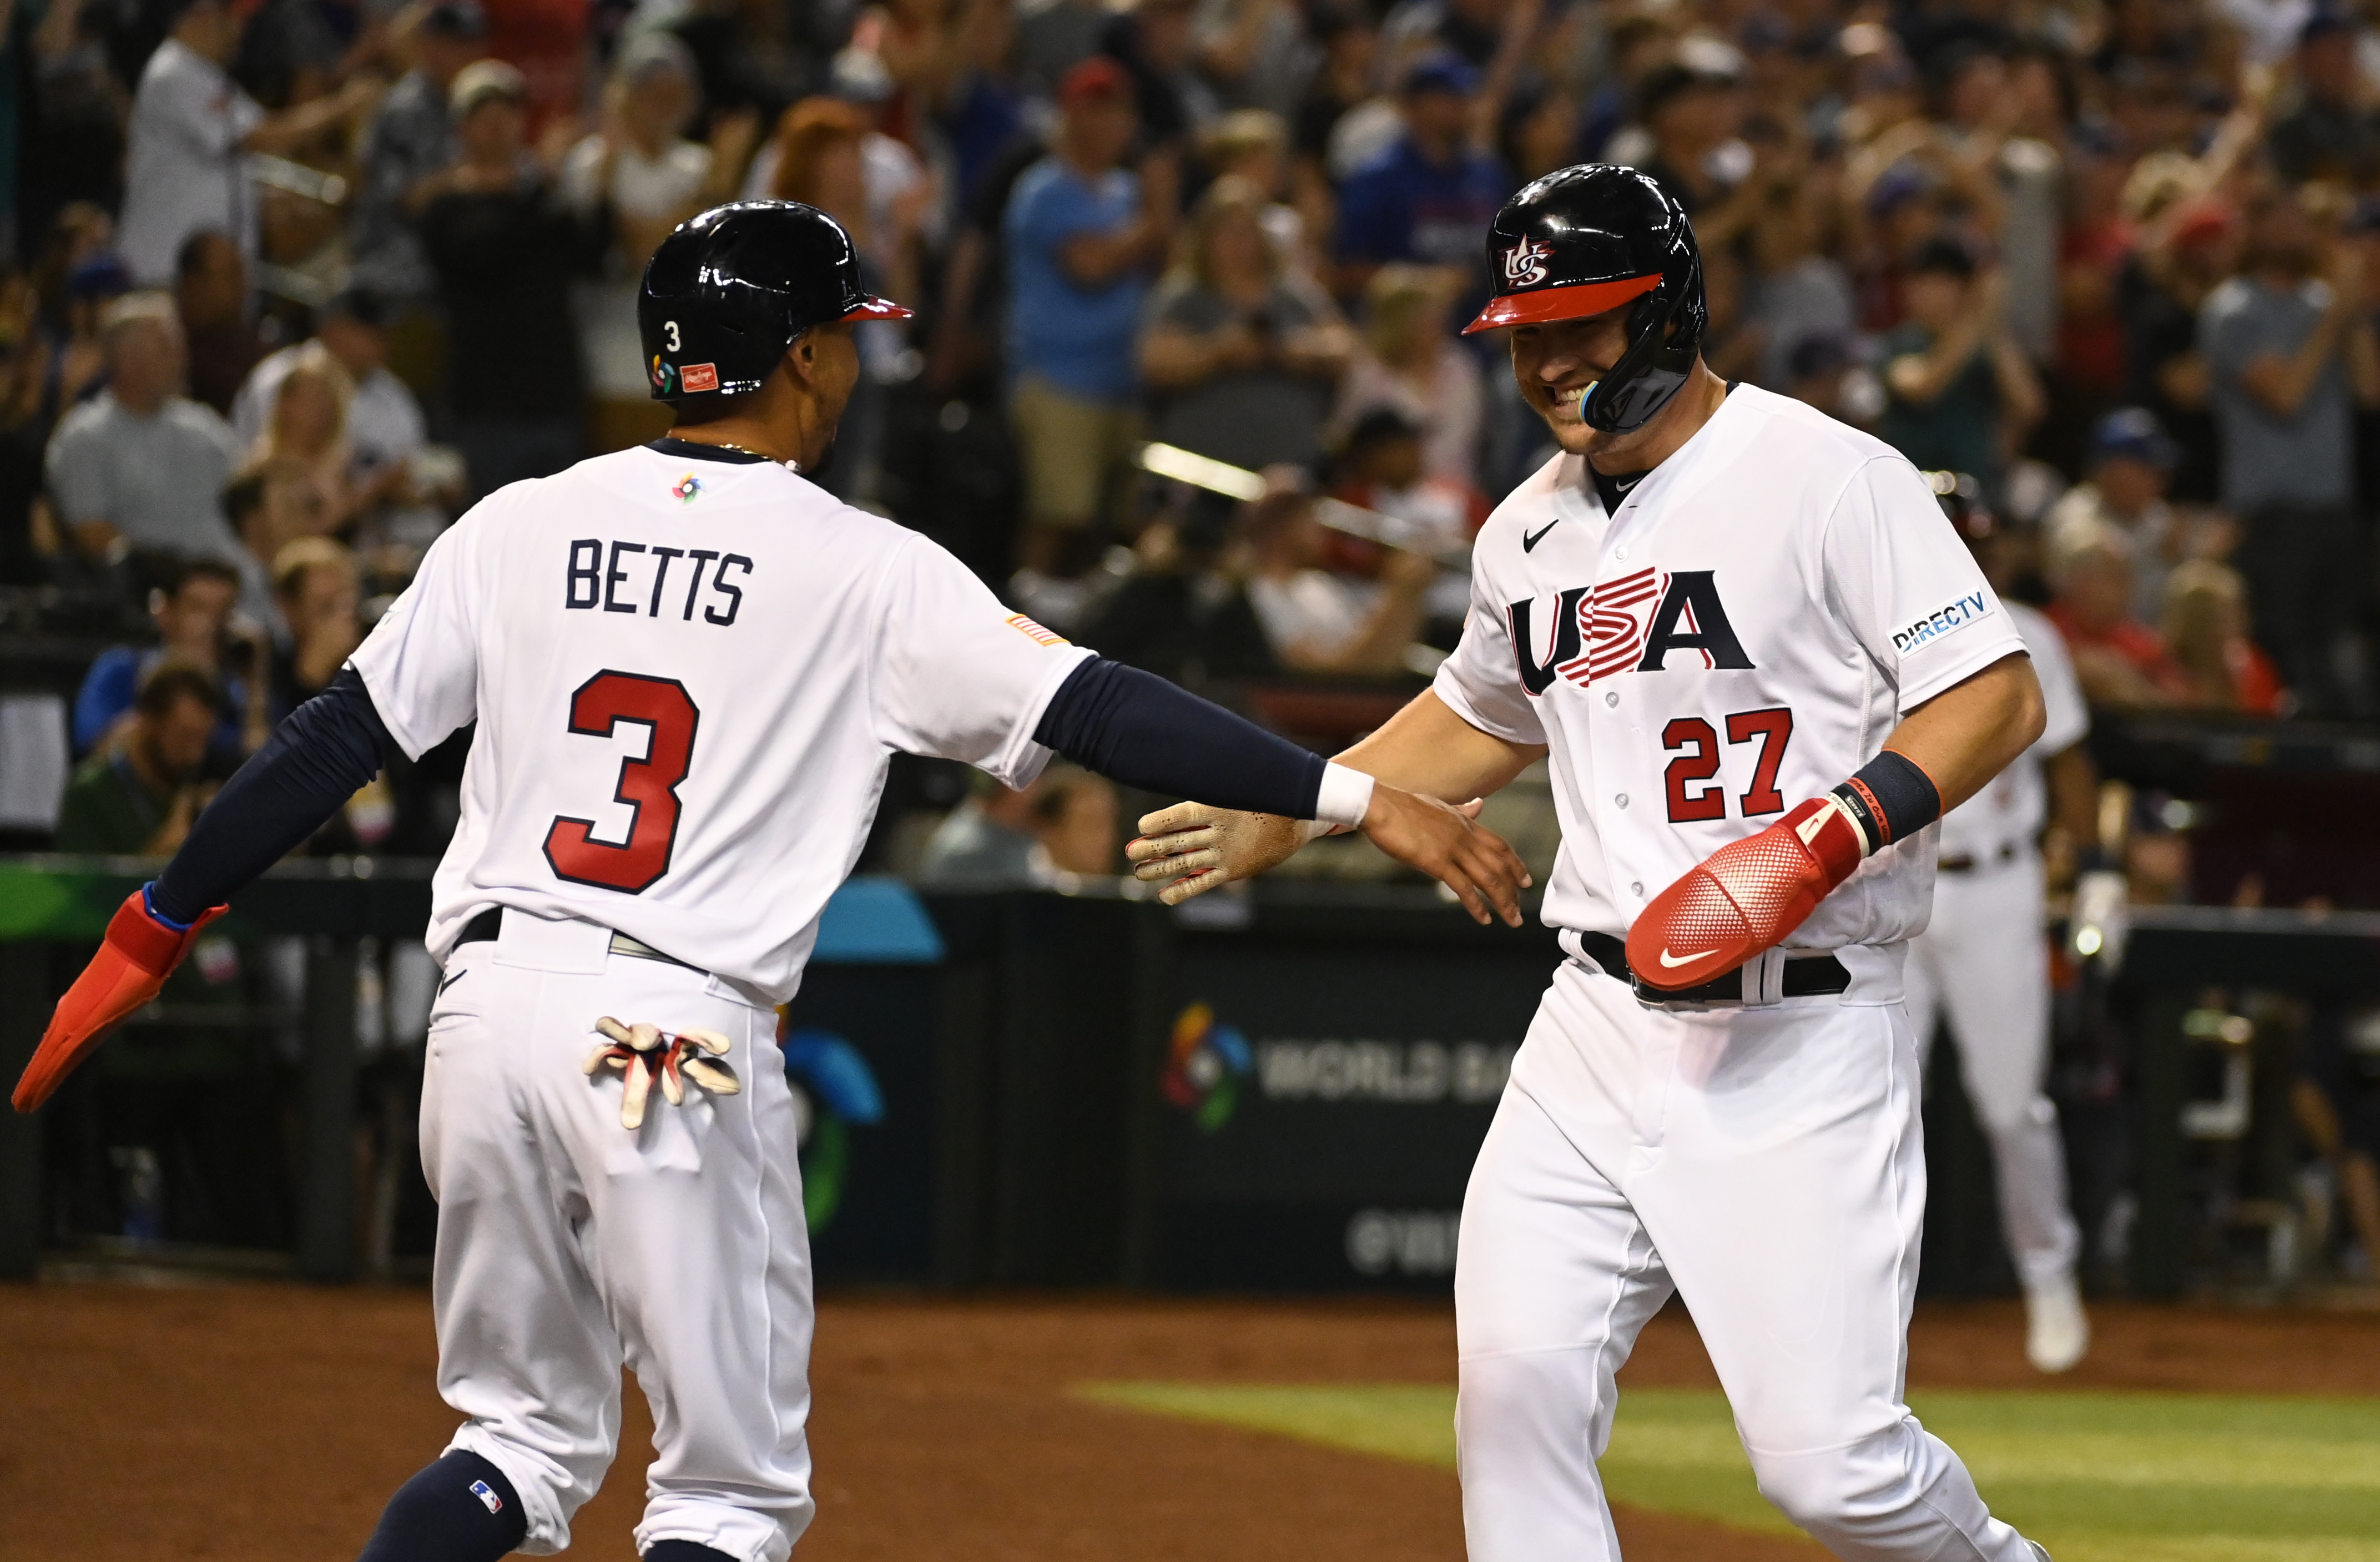 WBC scenarios, tiebreakers: How can USA, other teams advance?